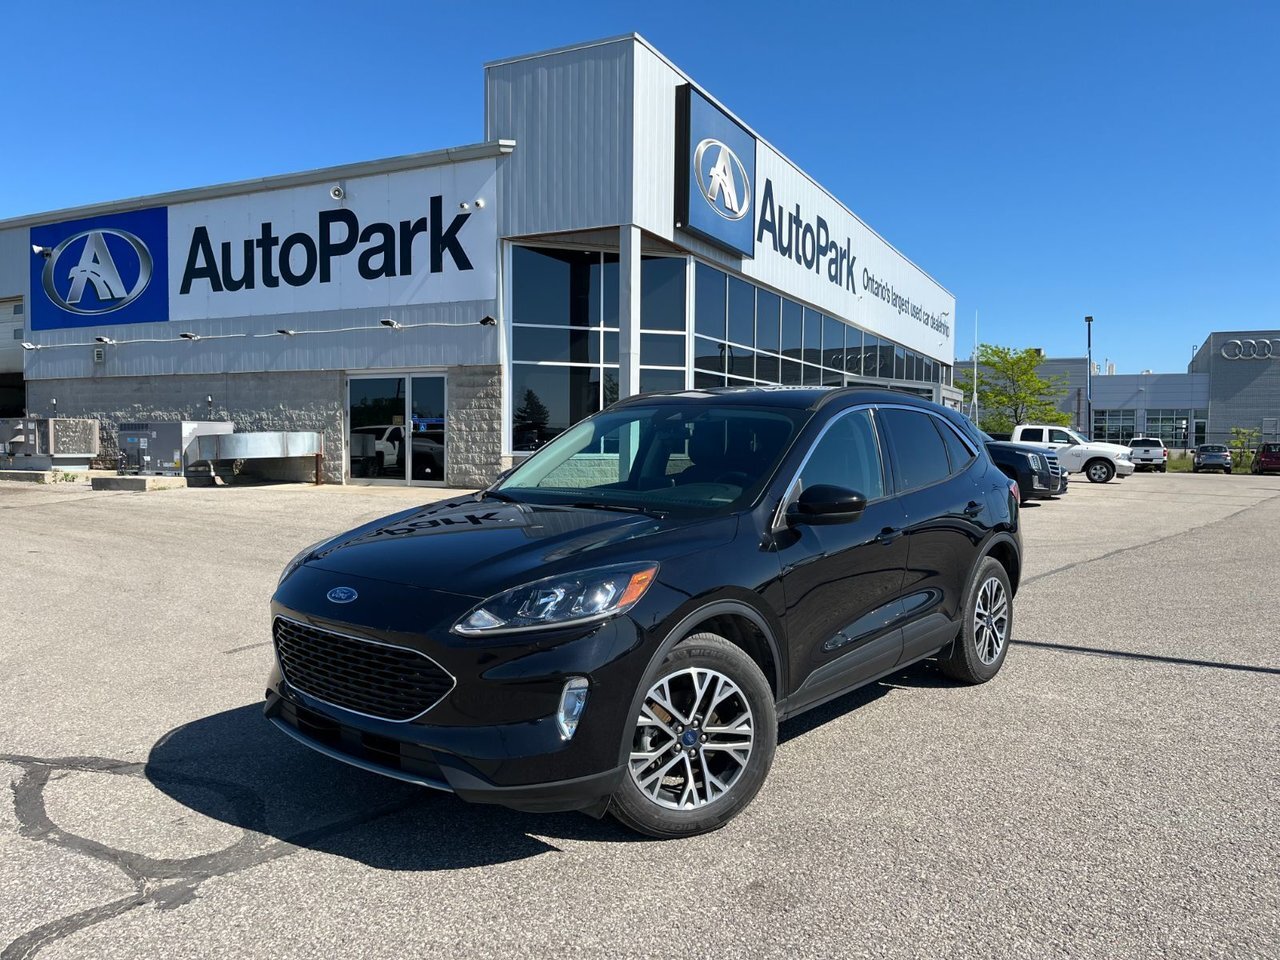 2020 Ford Escape SEL AWD | Remote Start | Heated Seats + Steering W